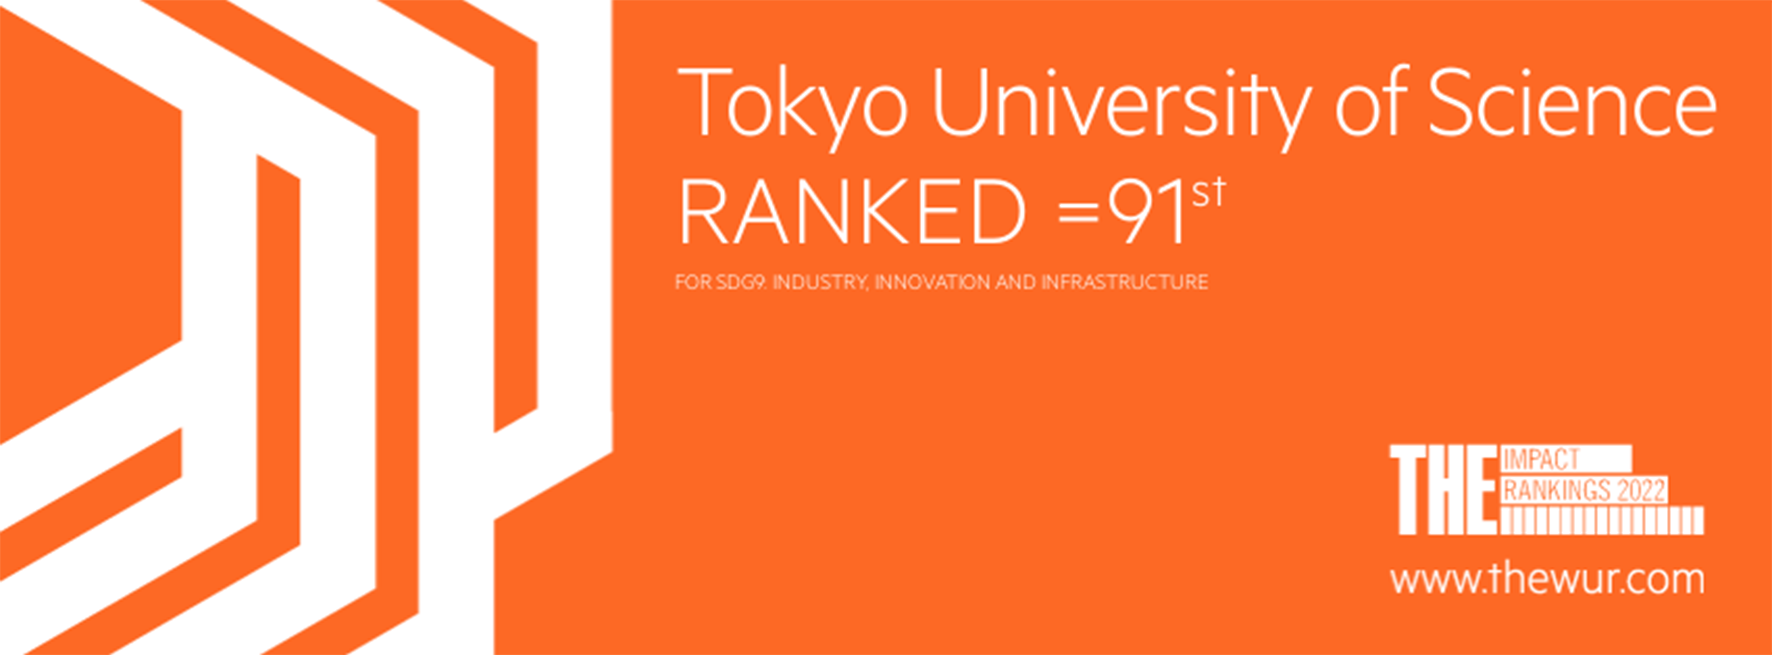 THE University Impact Rankings puts TUS 1st among private Japanese universities for "SDG 9 - Industry, Innovation and Infrastructure"